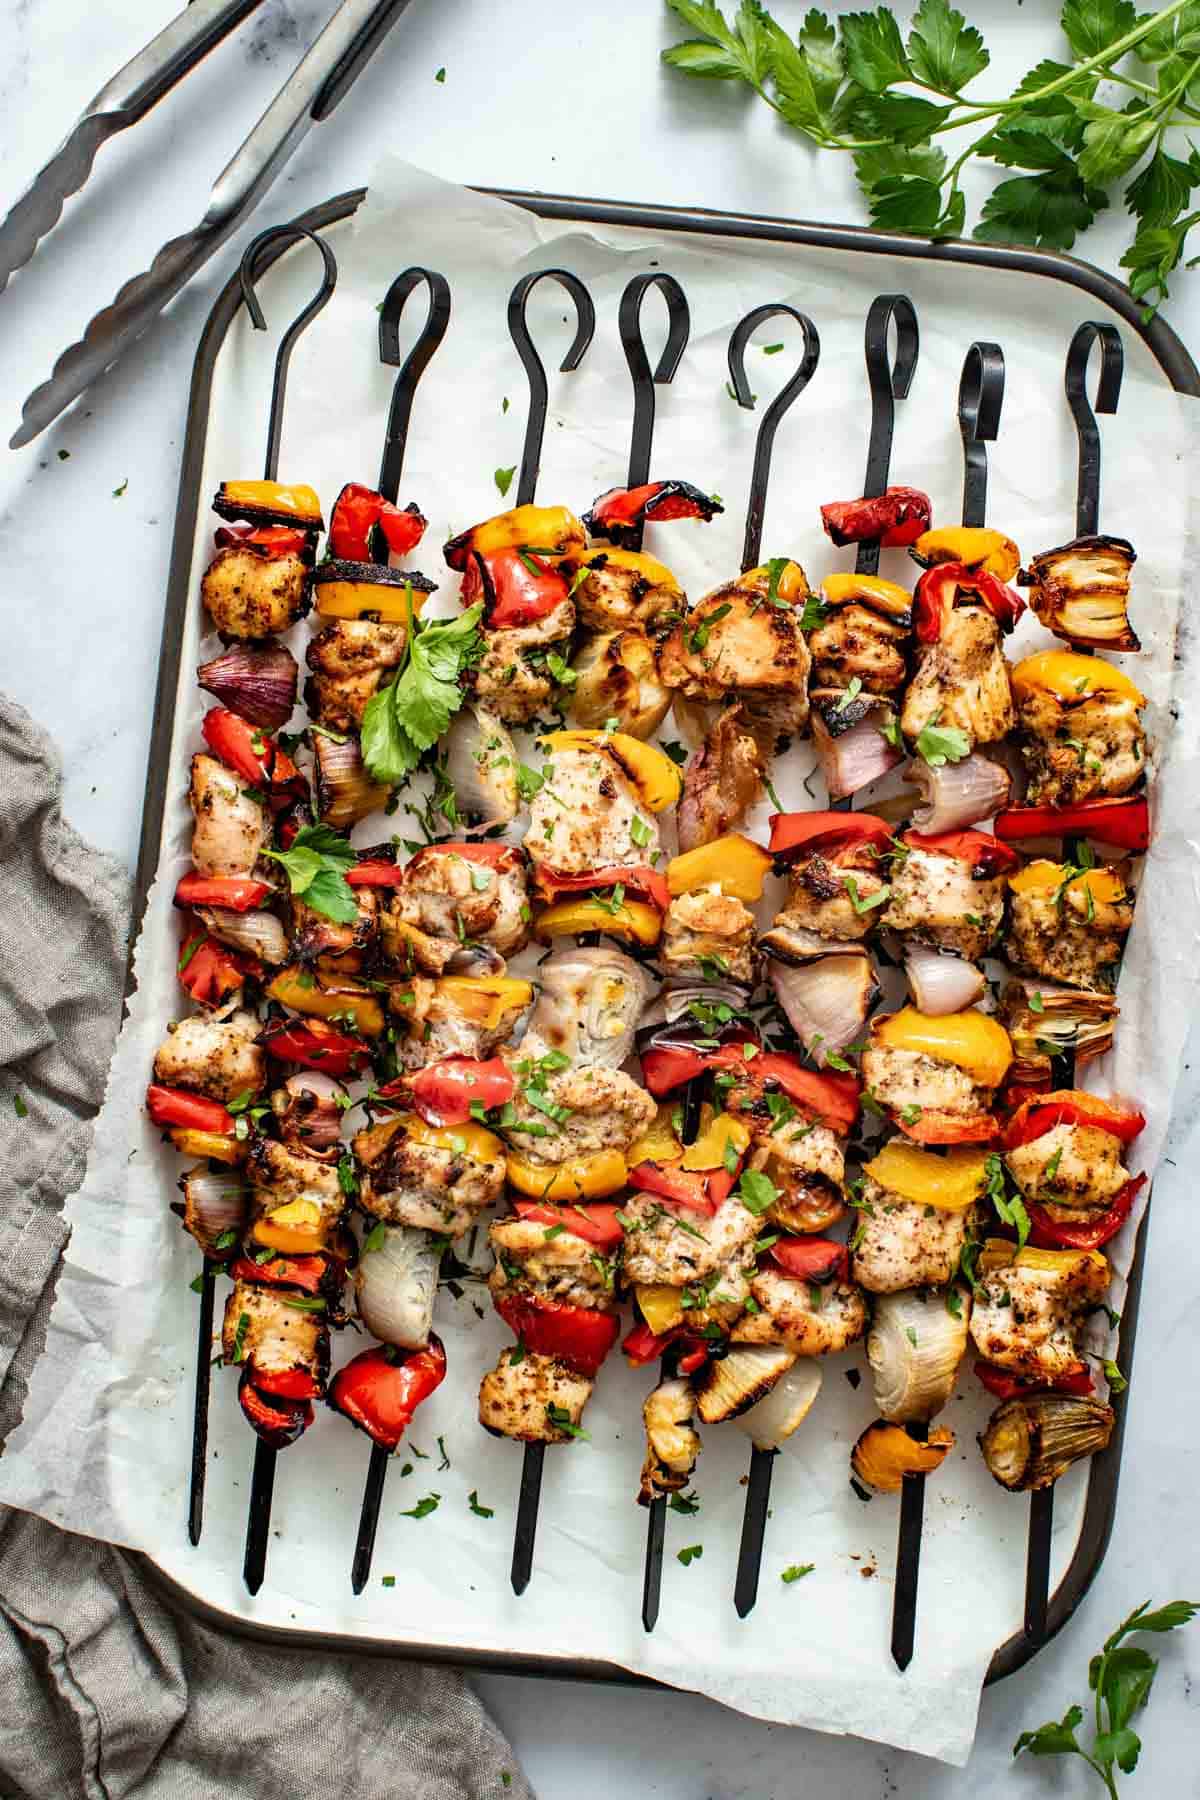 Chicken kabobs on skewers lined up on a baking sheet next to fresh parsley and a grey towel.